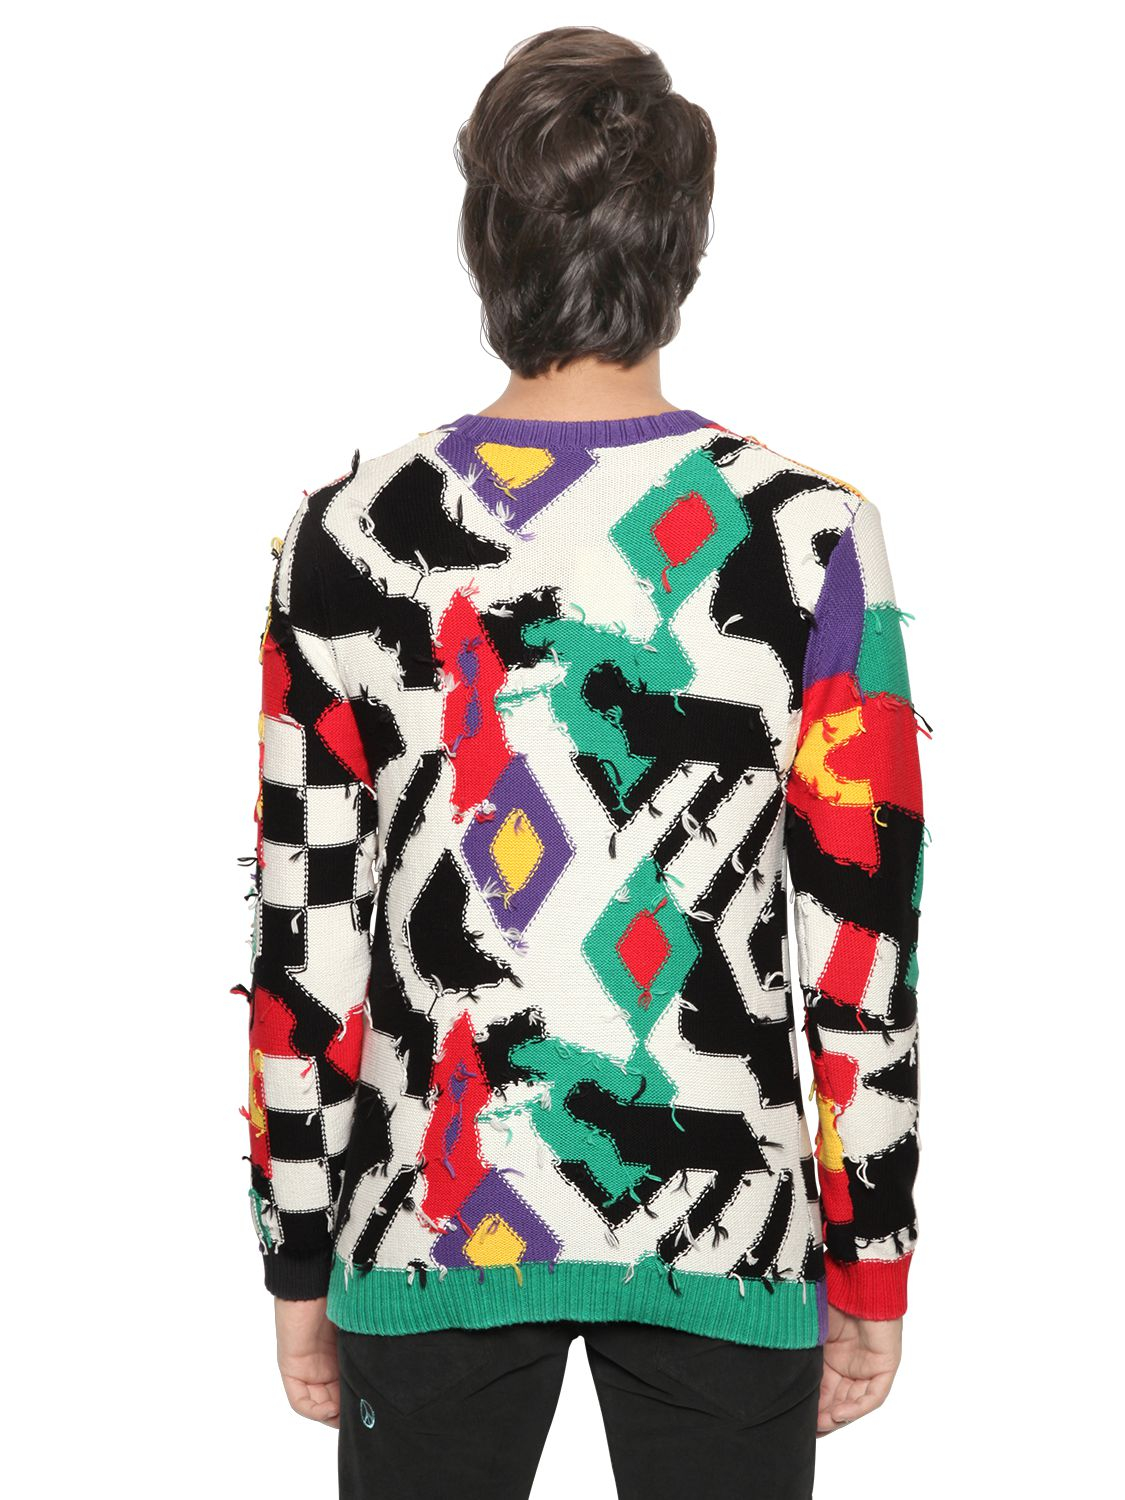 Lyst - Love Moschino Patchwork Cotton & Wool Sweater for Men